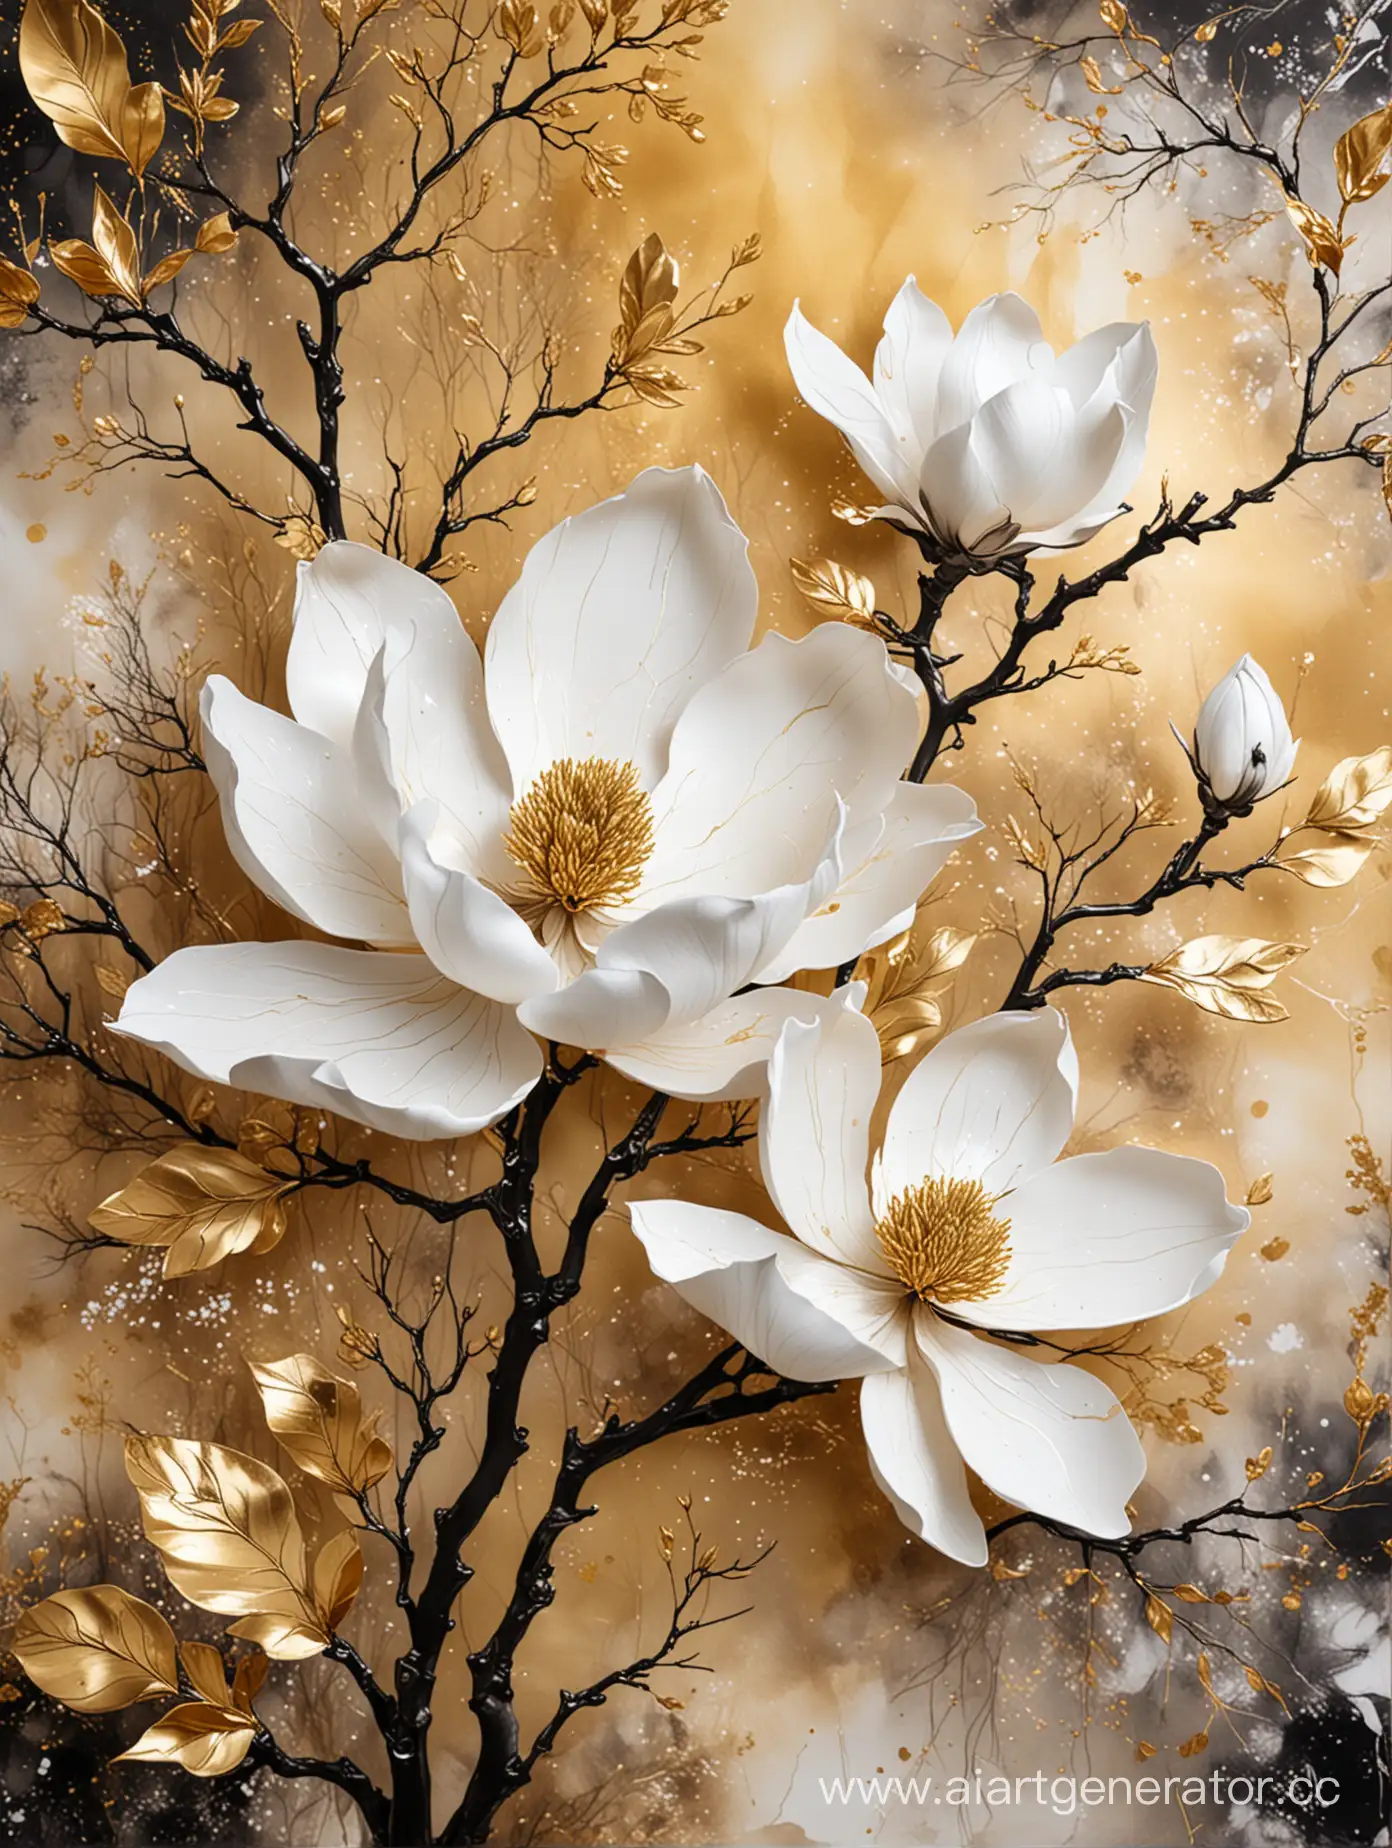 Elegant-3D-Magnolia-Blossom-in-Black-and-White-with-Gold-Accents-on-Ornate-Gold-Branches-Against-Alcohol-Ink-Aquarelle-Backdrop